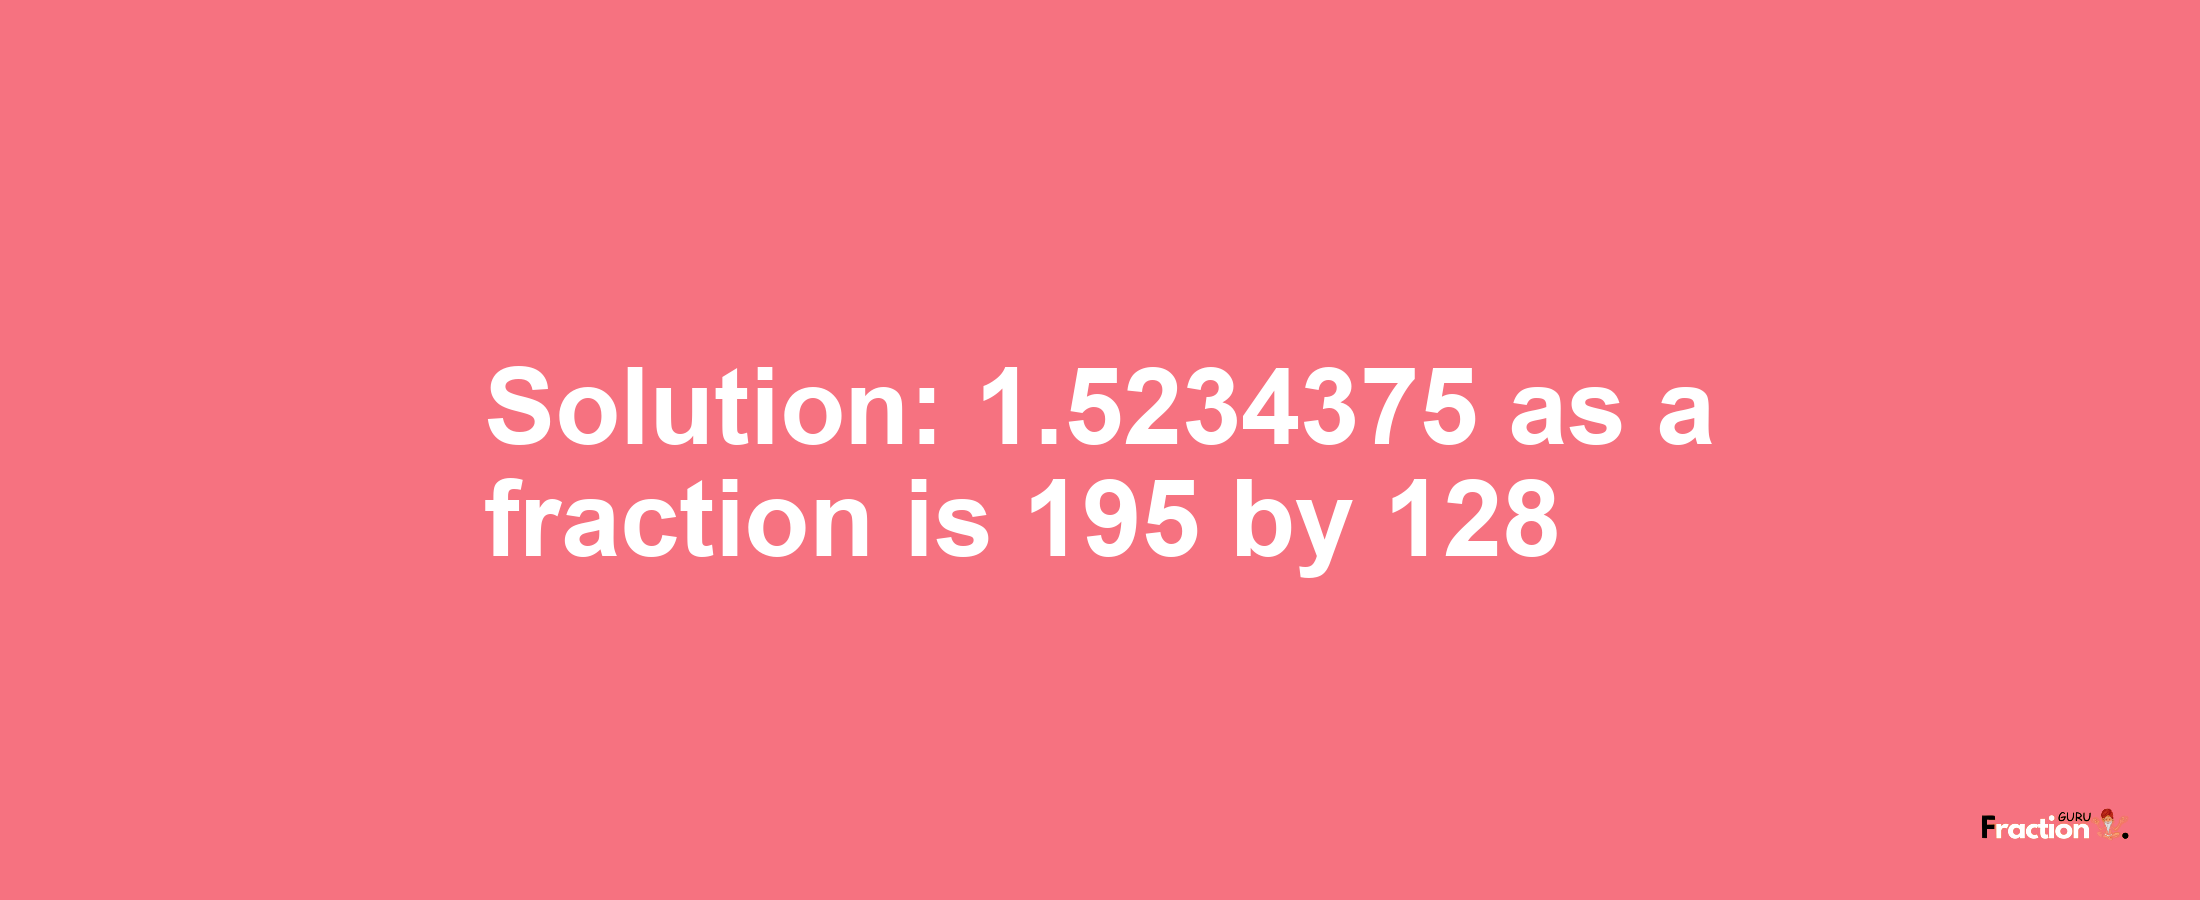 Solution:1.5234375 as a fraction is 195/128